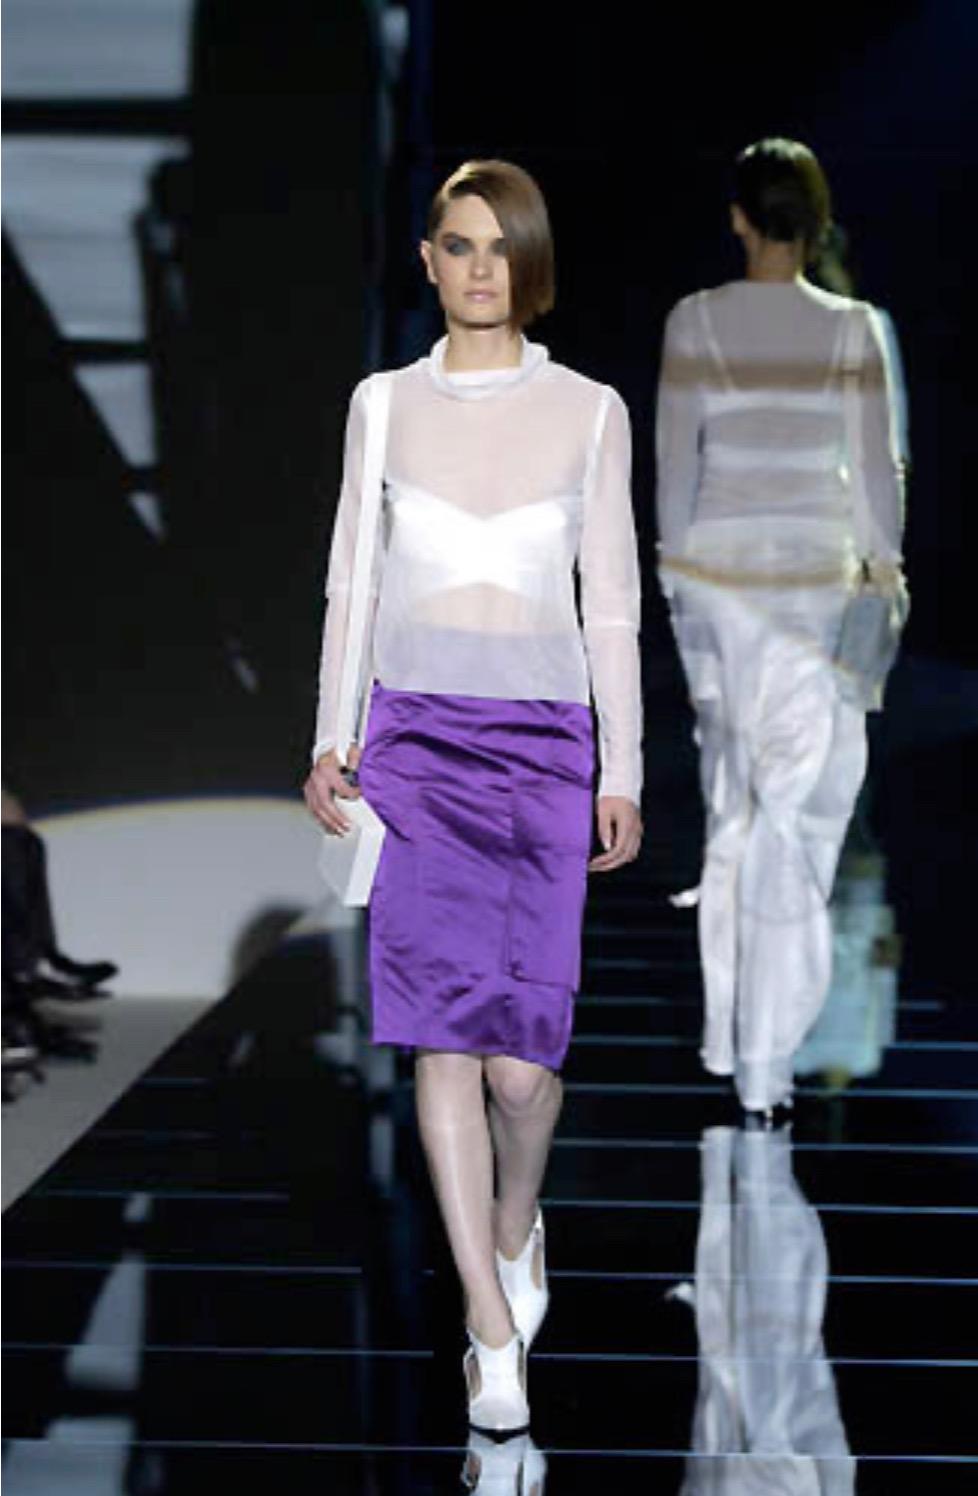 Presenting a vibrant purple silk satin Gucci skirt, designed by Tom Ford. From the Spring/Summer 2001 collection, this skirt is constructed entirely of luxurious silk satin. The skirt debuted on the season's runway as part of look 10 modeled by